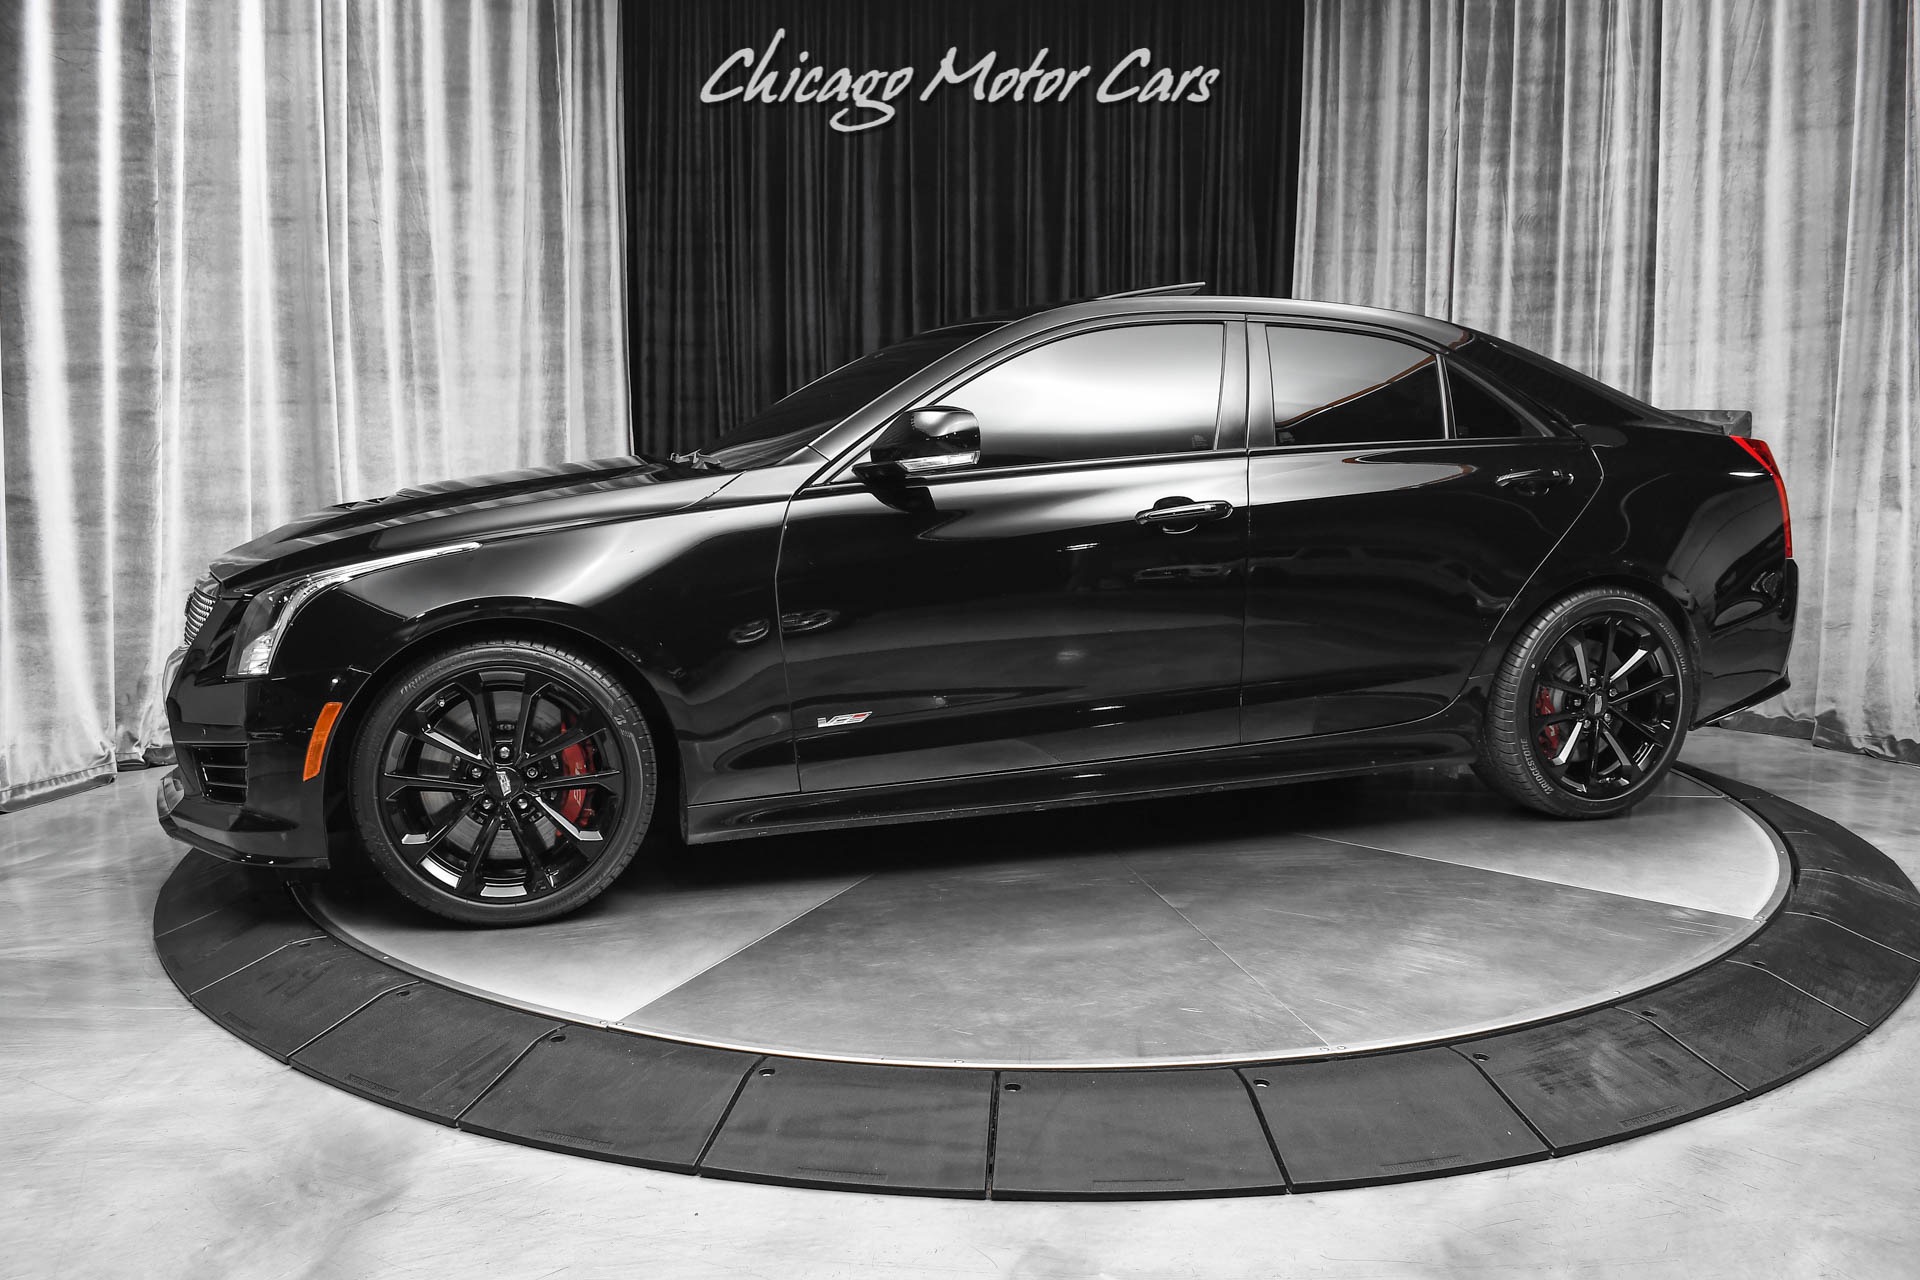 Used 2016 Cadillac ATS-V Performance Sedan! Black Raven! Luxury Pack!  Recaro Seats! Sunroof! LOADED! For Sale (Special Pricing) | Chicago Motor  Cars Stock #18889